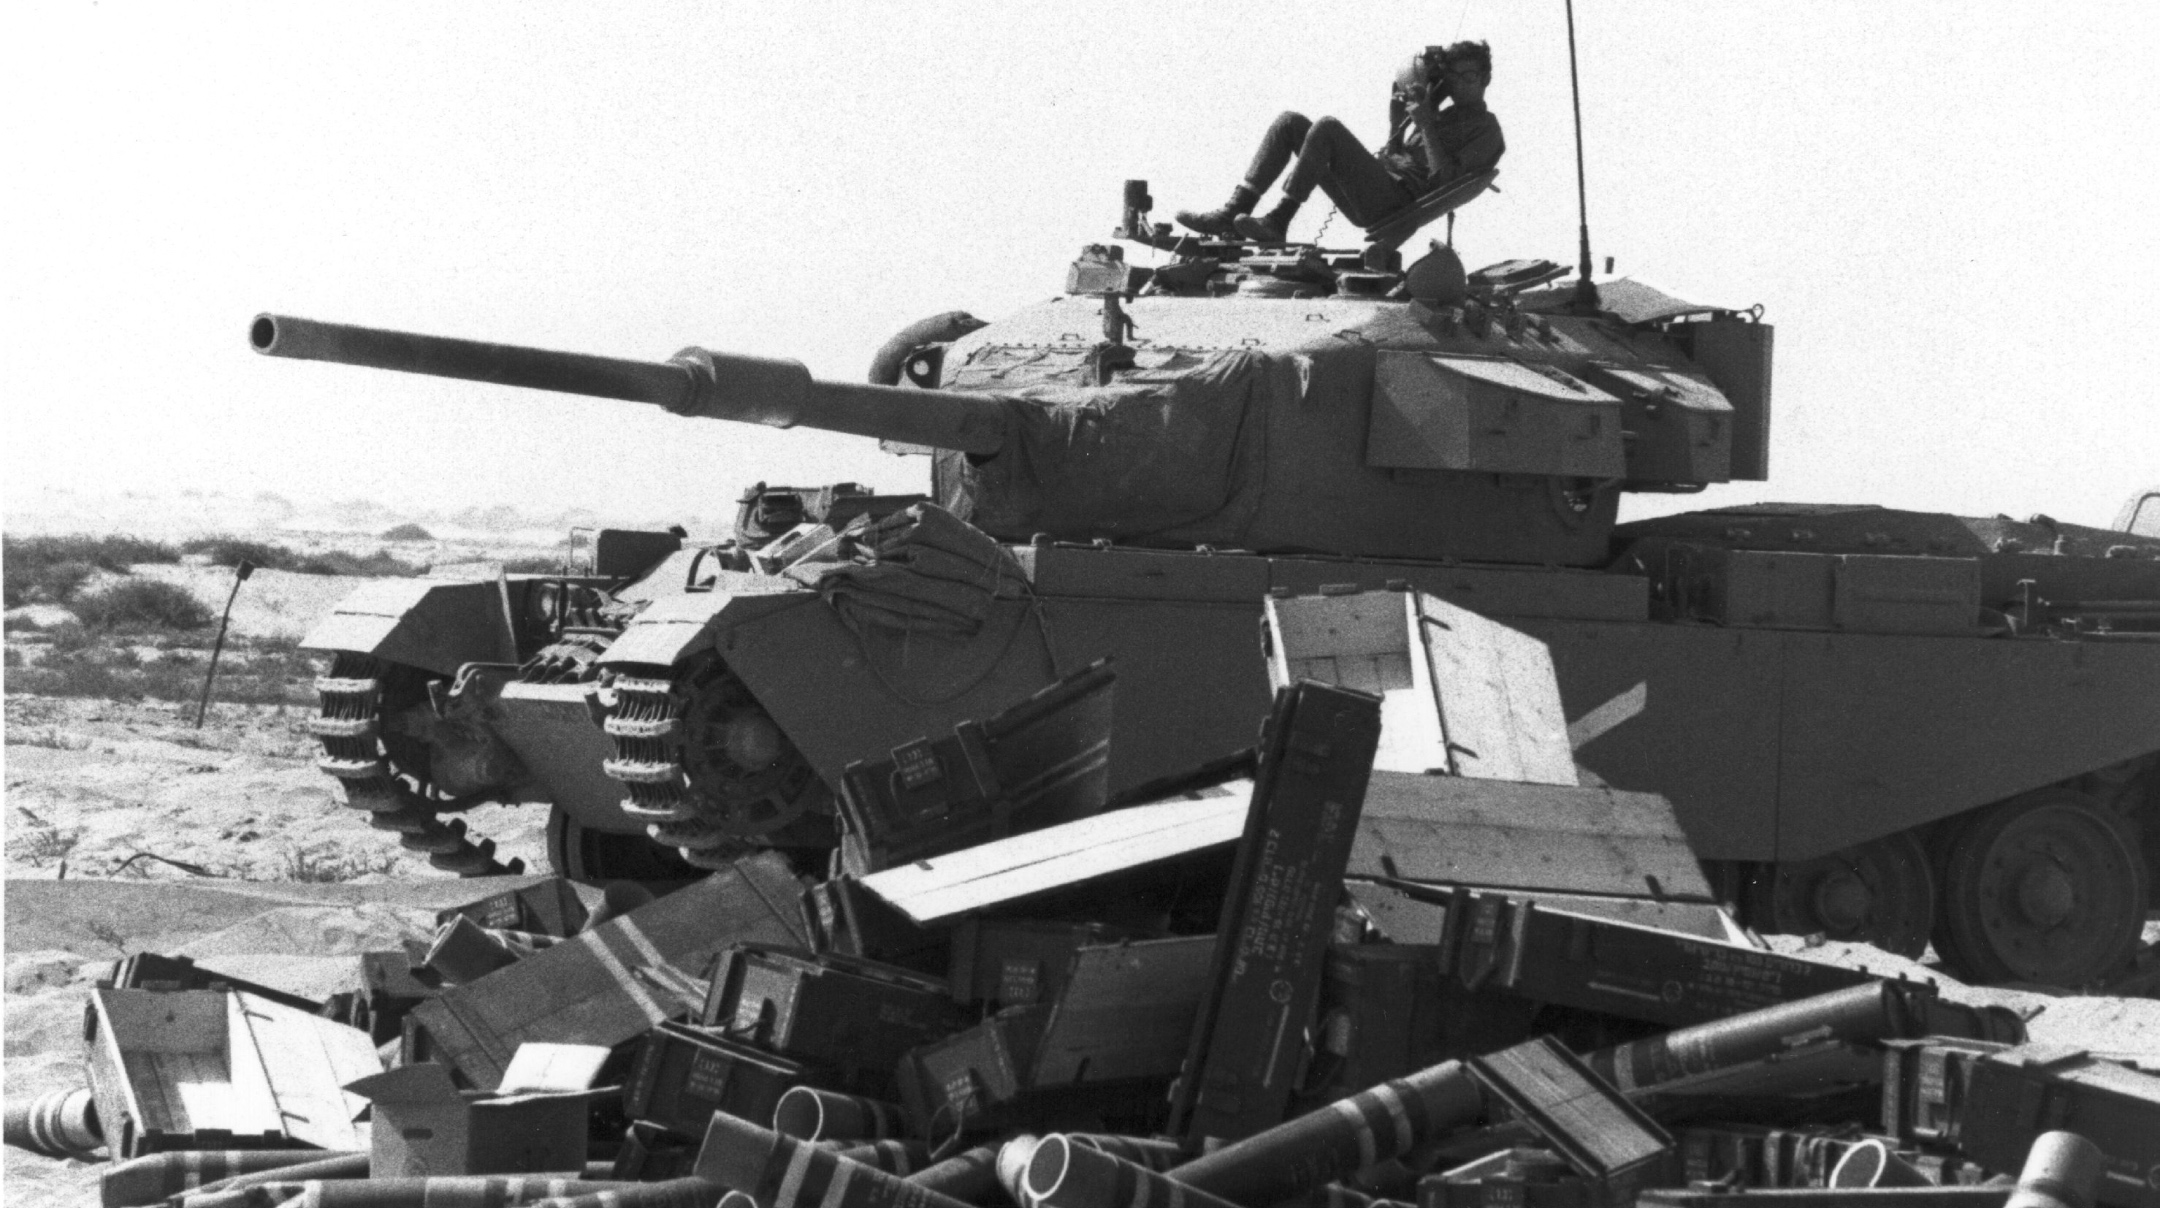 50 years after the Yom Kippur War, veterans see echoes in Israel’s current crisis